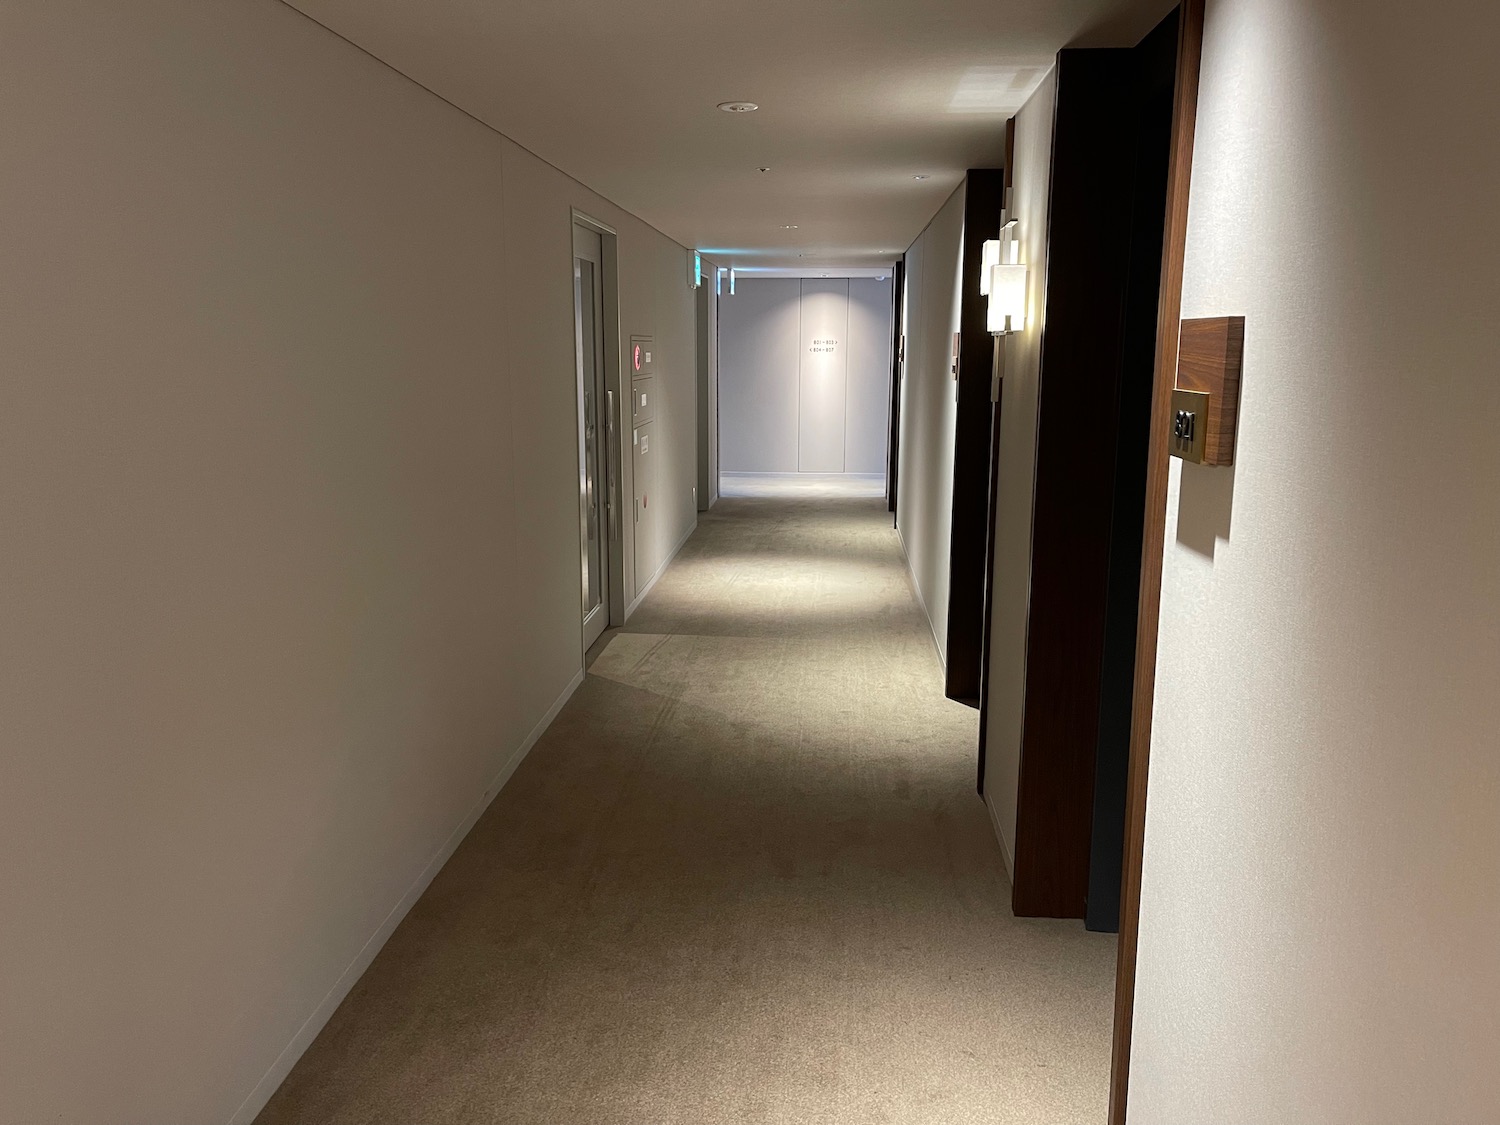 a hallway with doors and a light on the wall